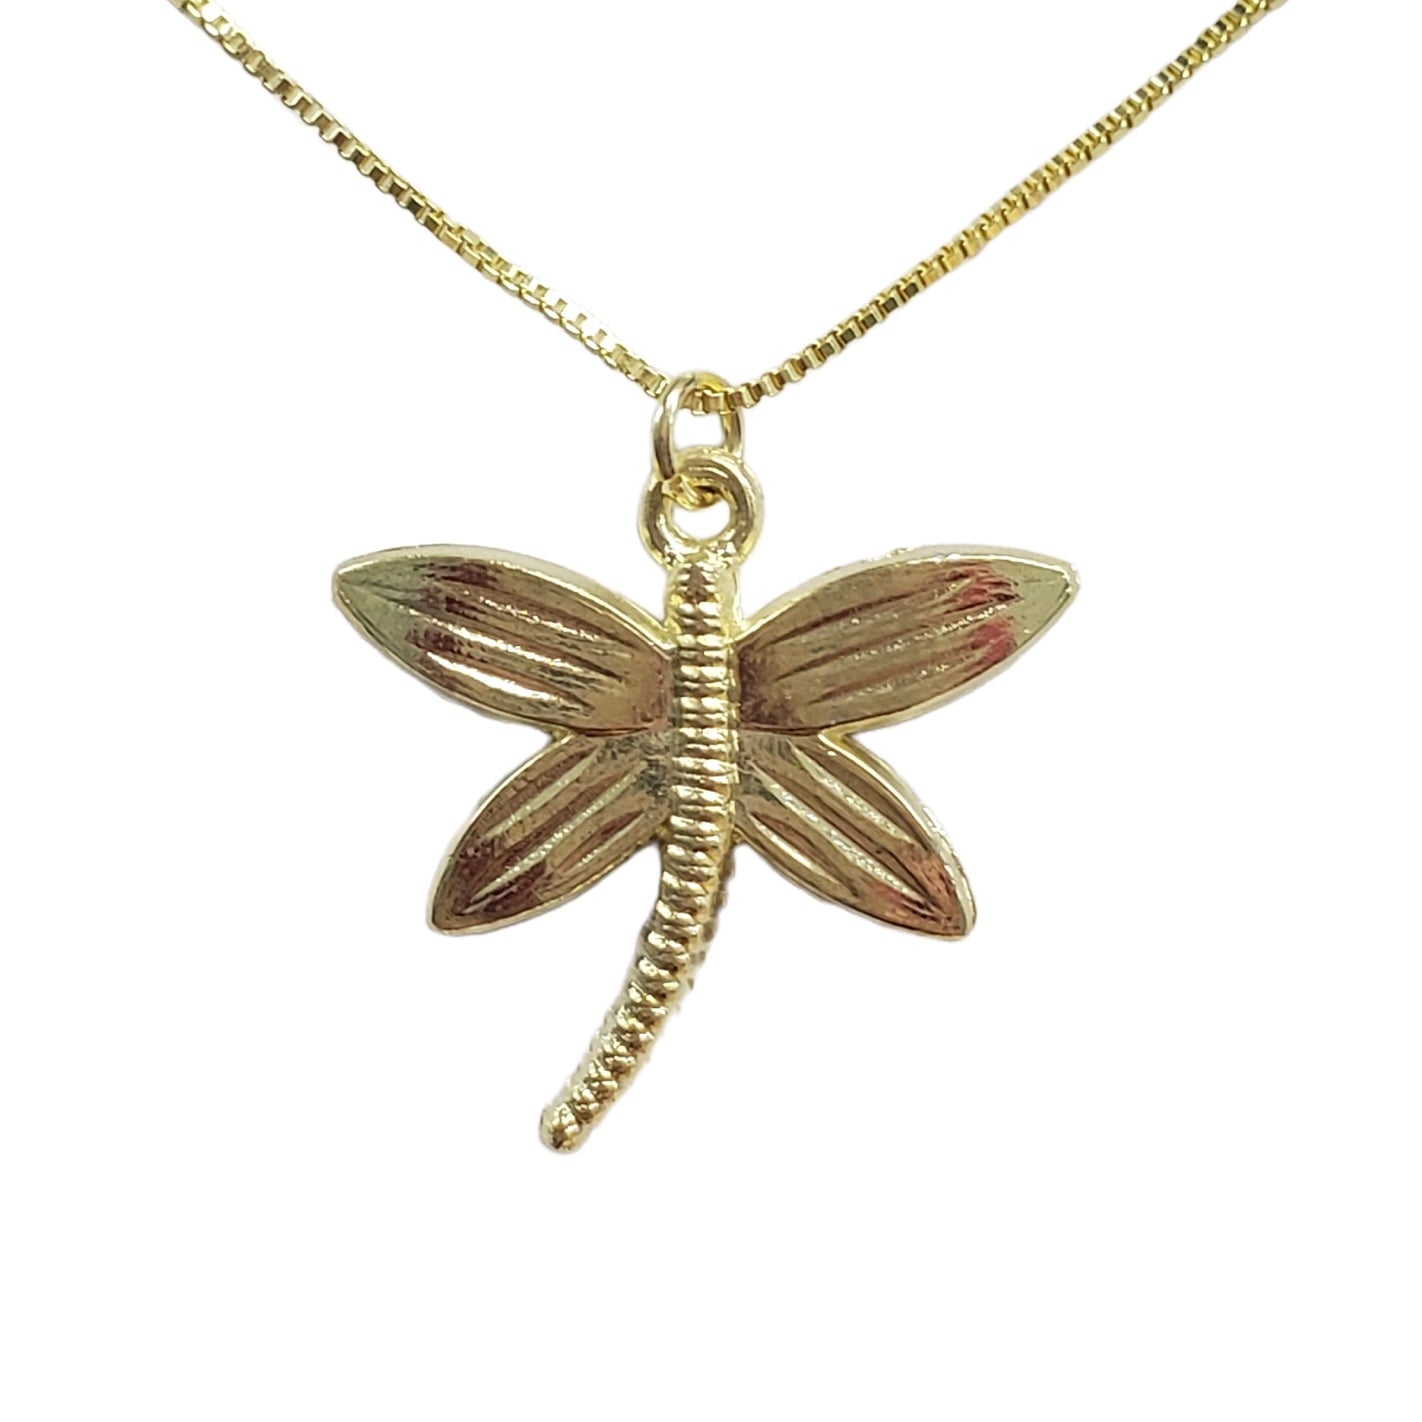 03ctw Dragonfly Diamond Pendant with Sterling Silver Chain - 7947373 | HSN